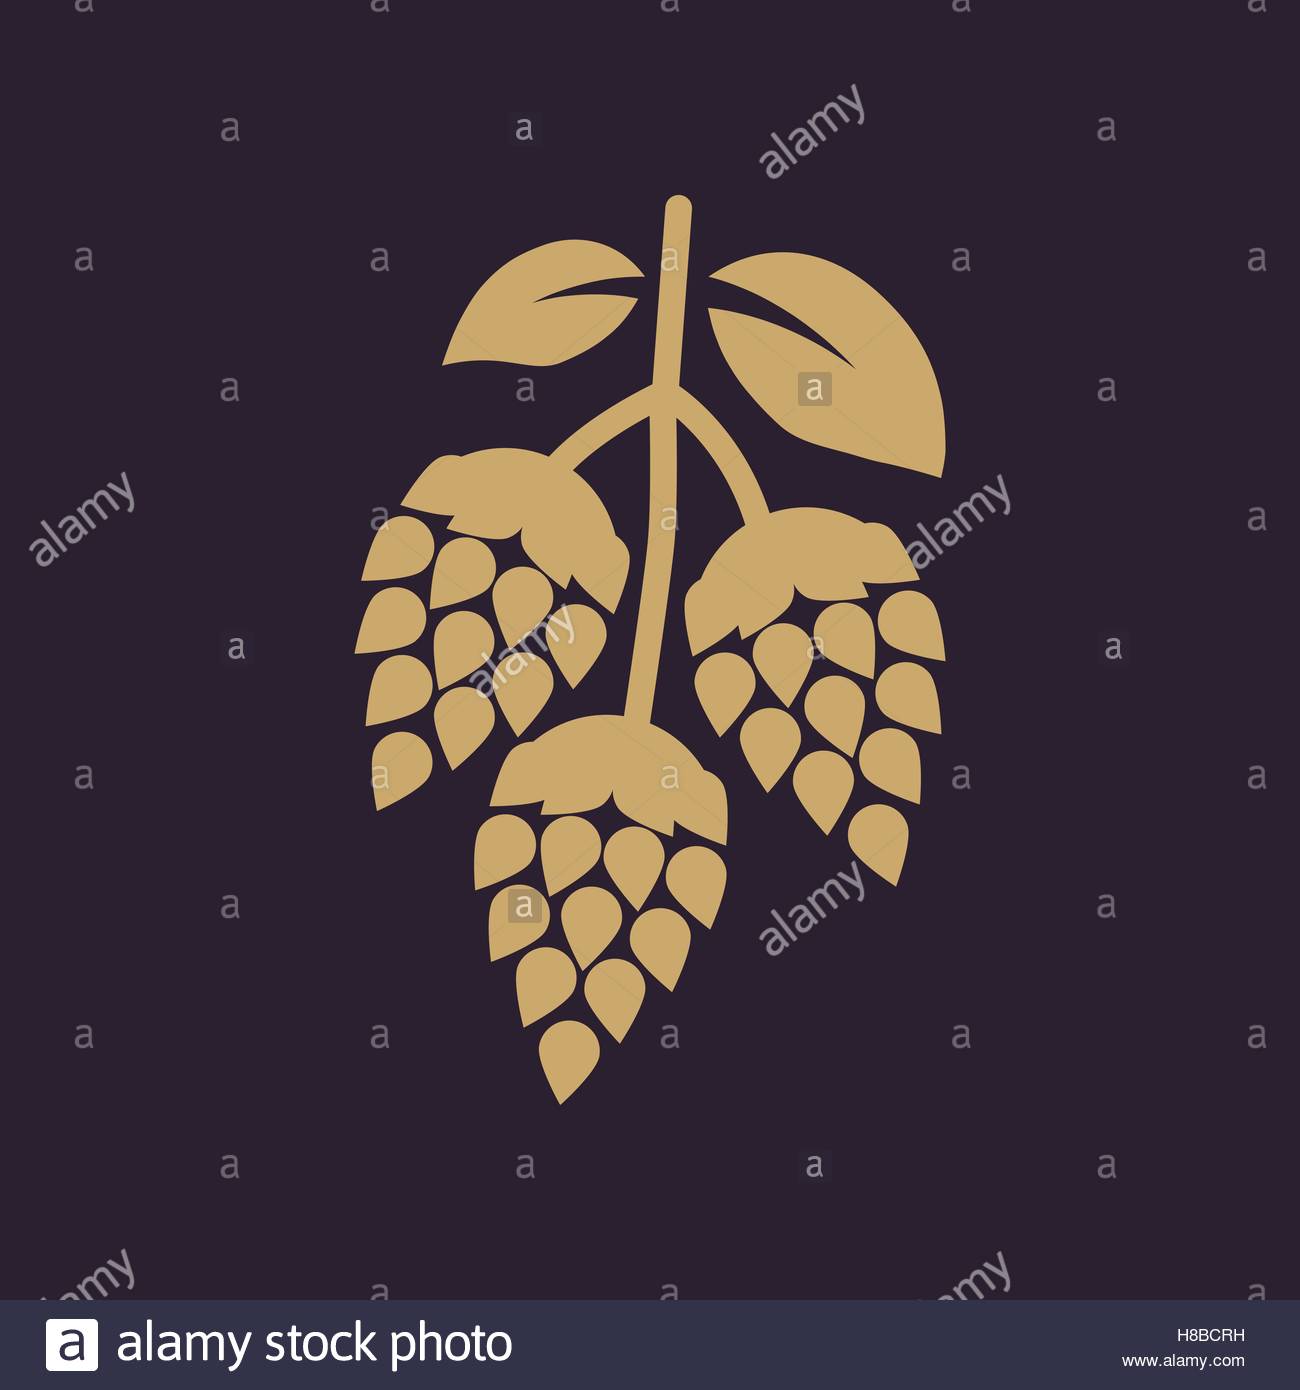 Beer, brew, drink, hops, malt, plant, vegetable icon | Icon search 